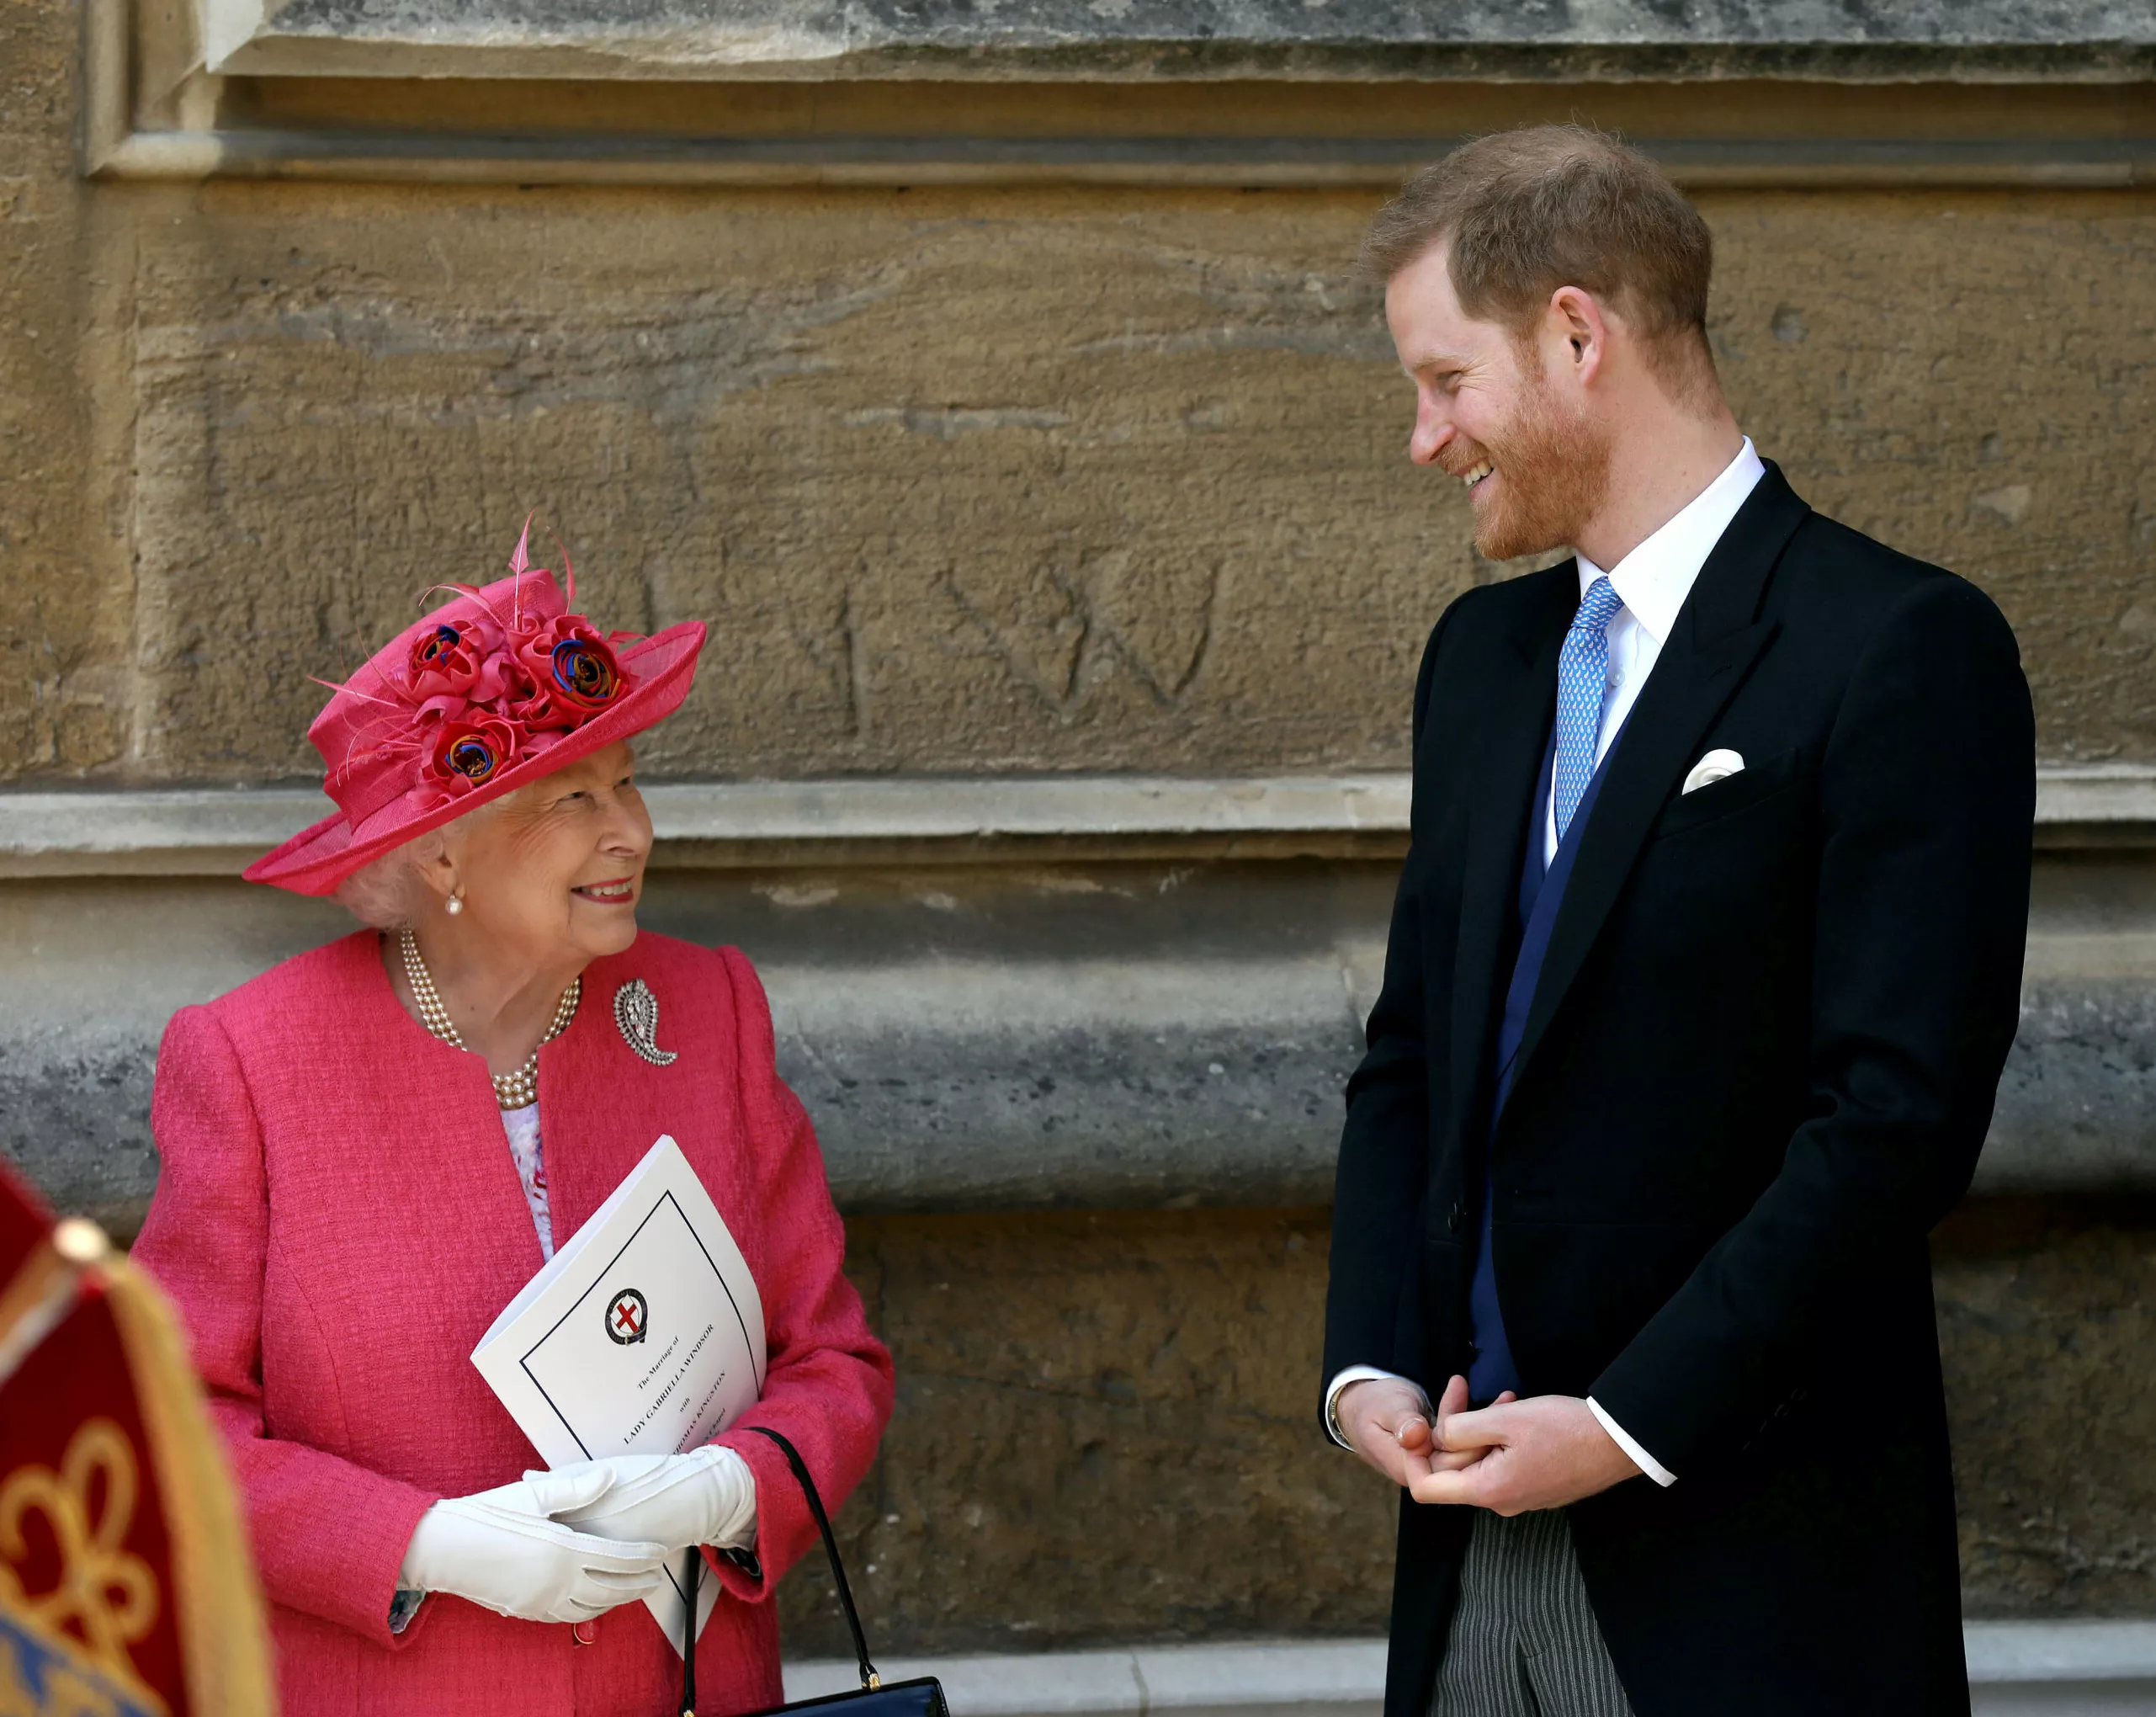  Queen Elizabeth II talks to Prince Harry as they leave after the wedding of Lady Gabriella Windsor and Thomas Kingston at St George's Chapel in Windsor Castle, near London, Britain May 18, 2019